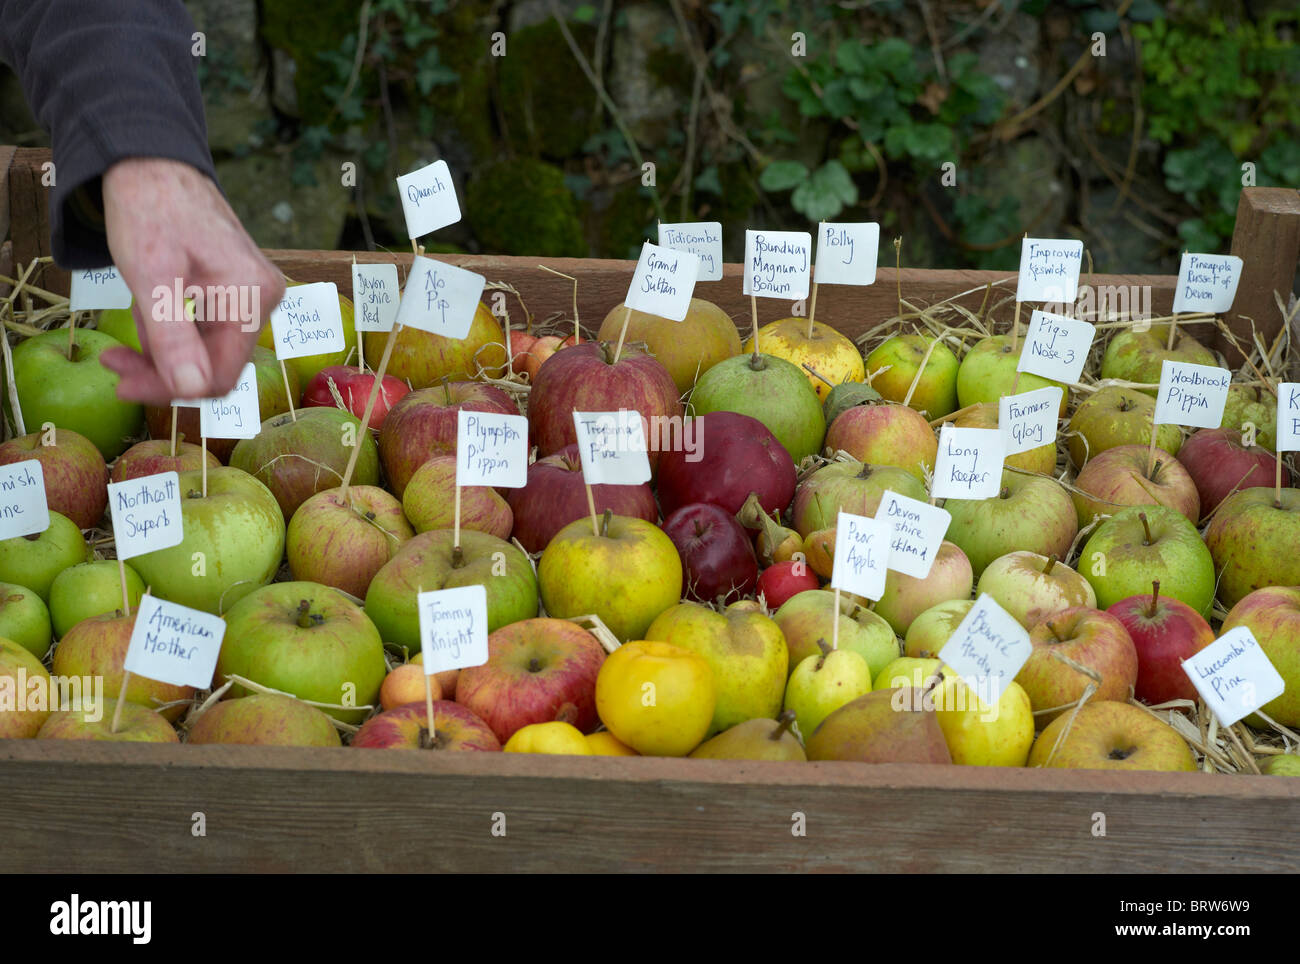 Labeled varieties of apples in a box show the diversity of apples grown in the UK Stock Photo